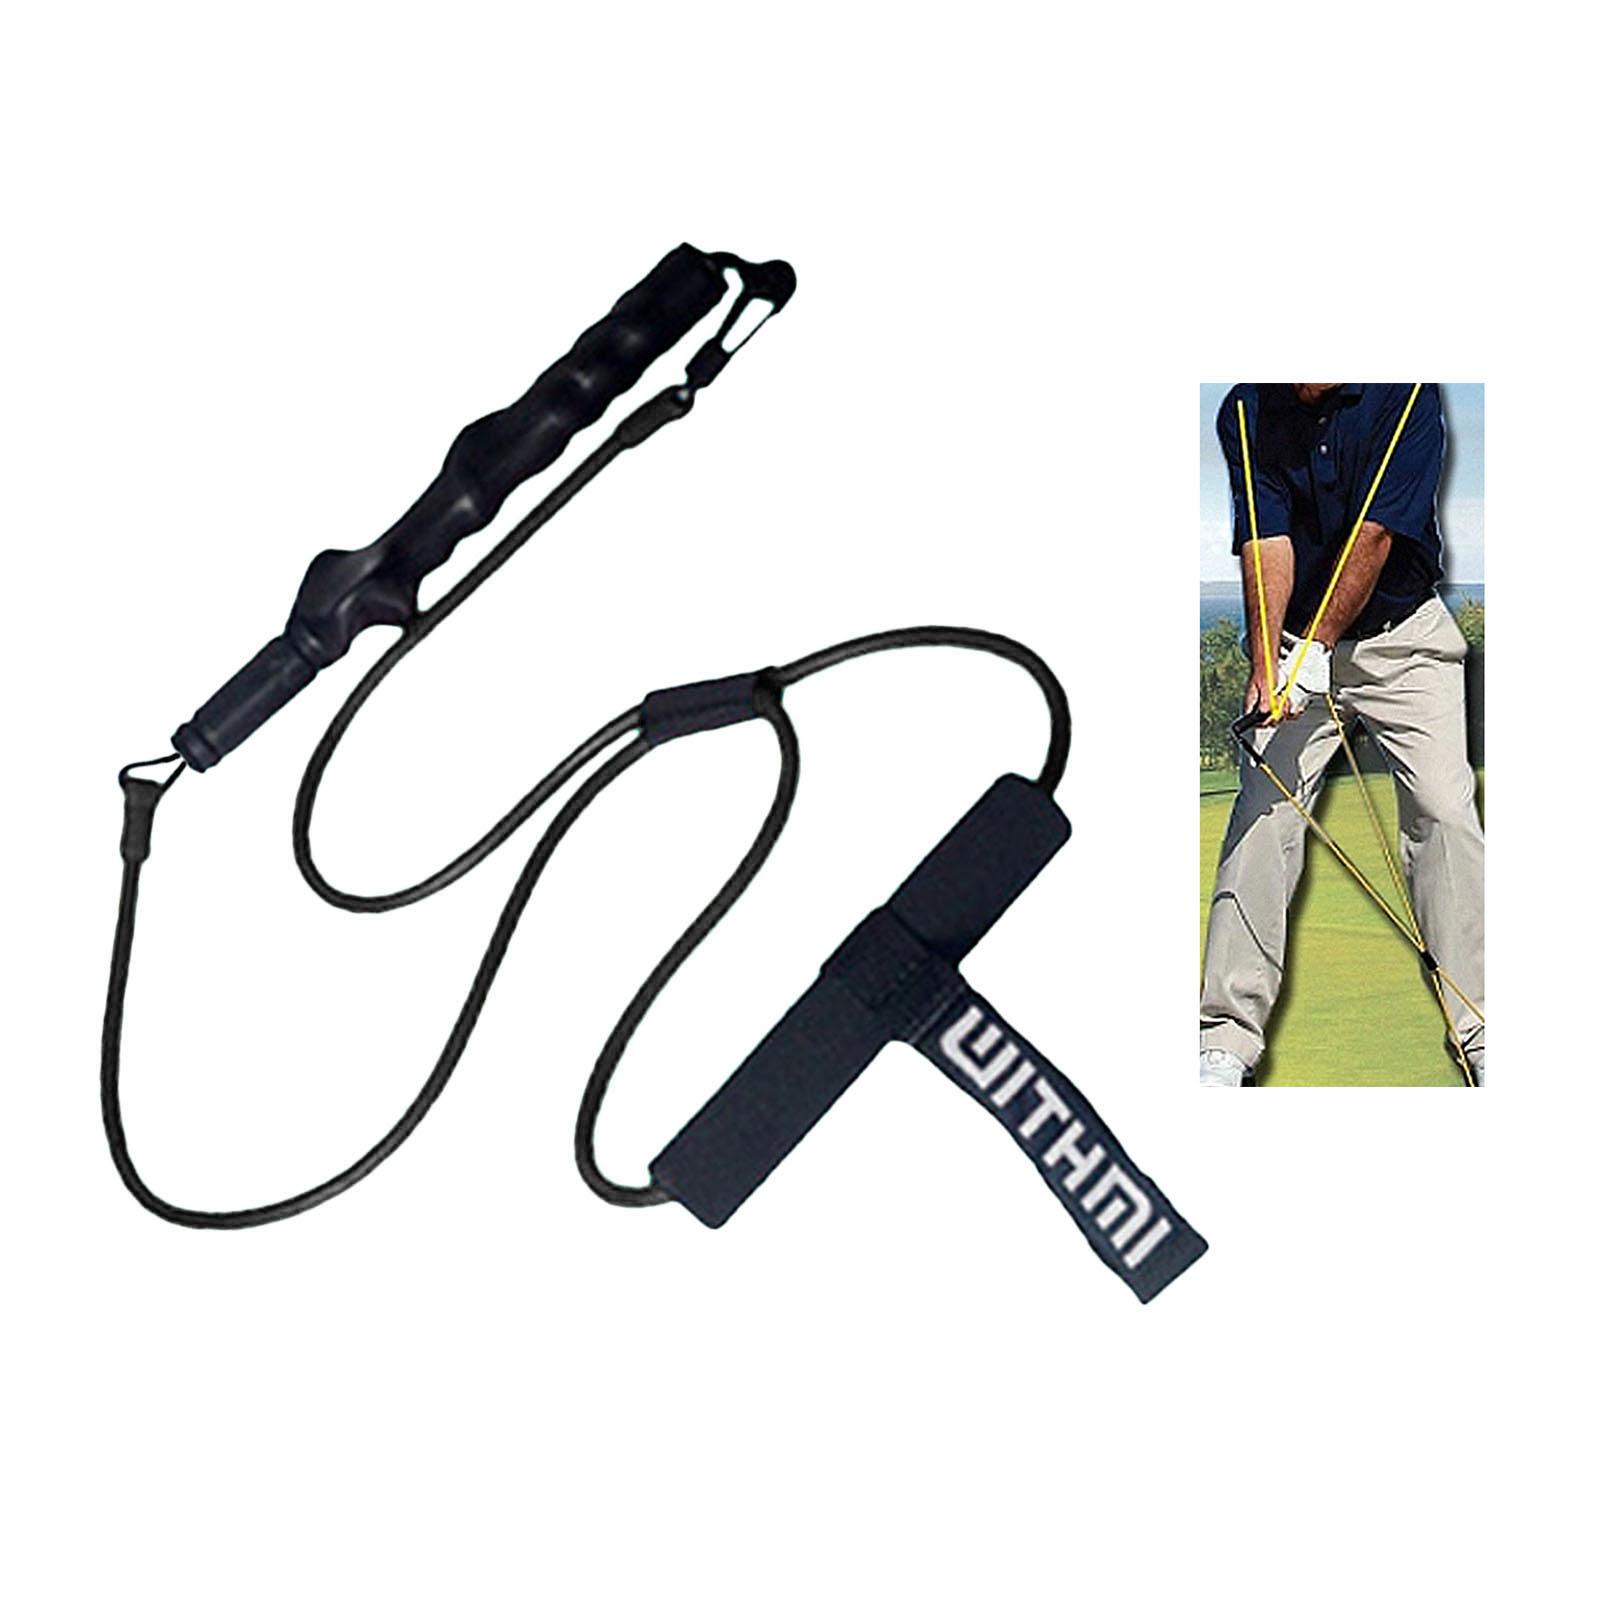 Resistance Bands Golf Yoga Warm Up Activation Training Aid Fitness Black